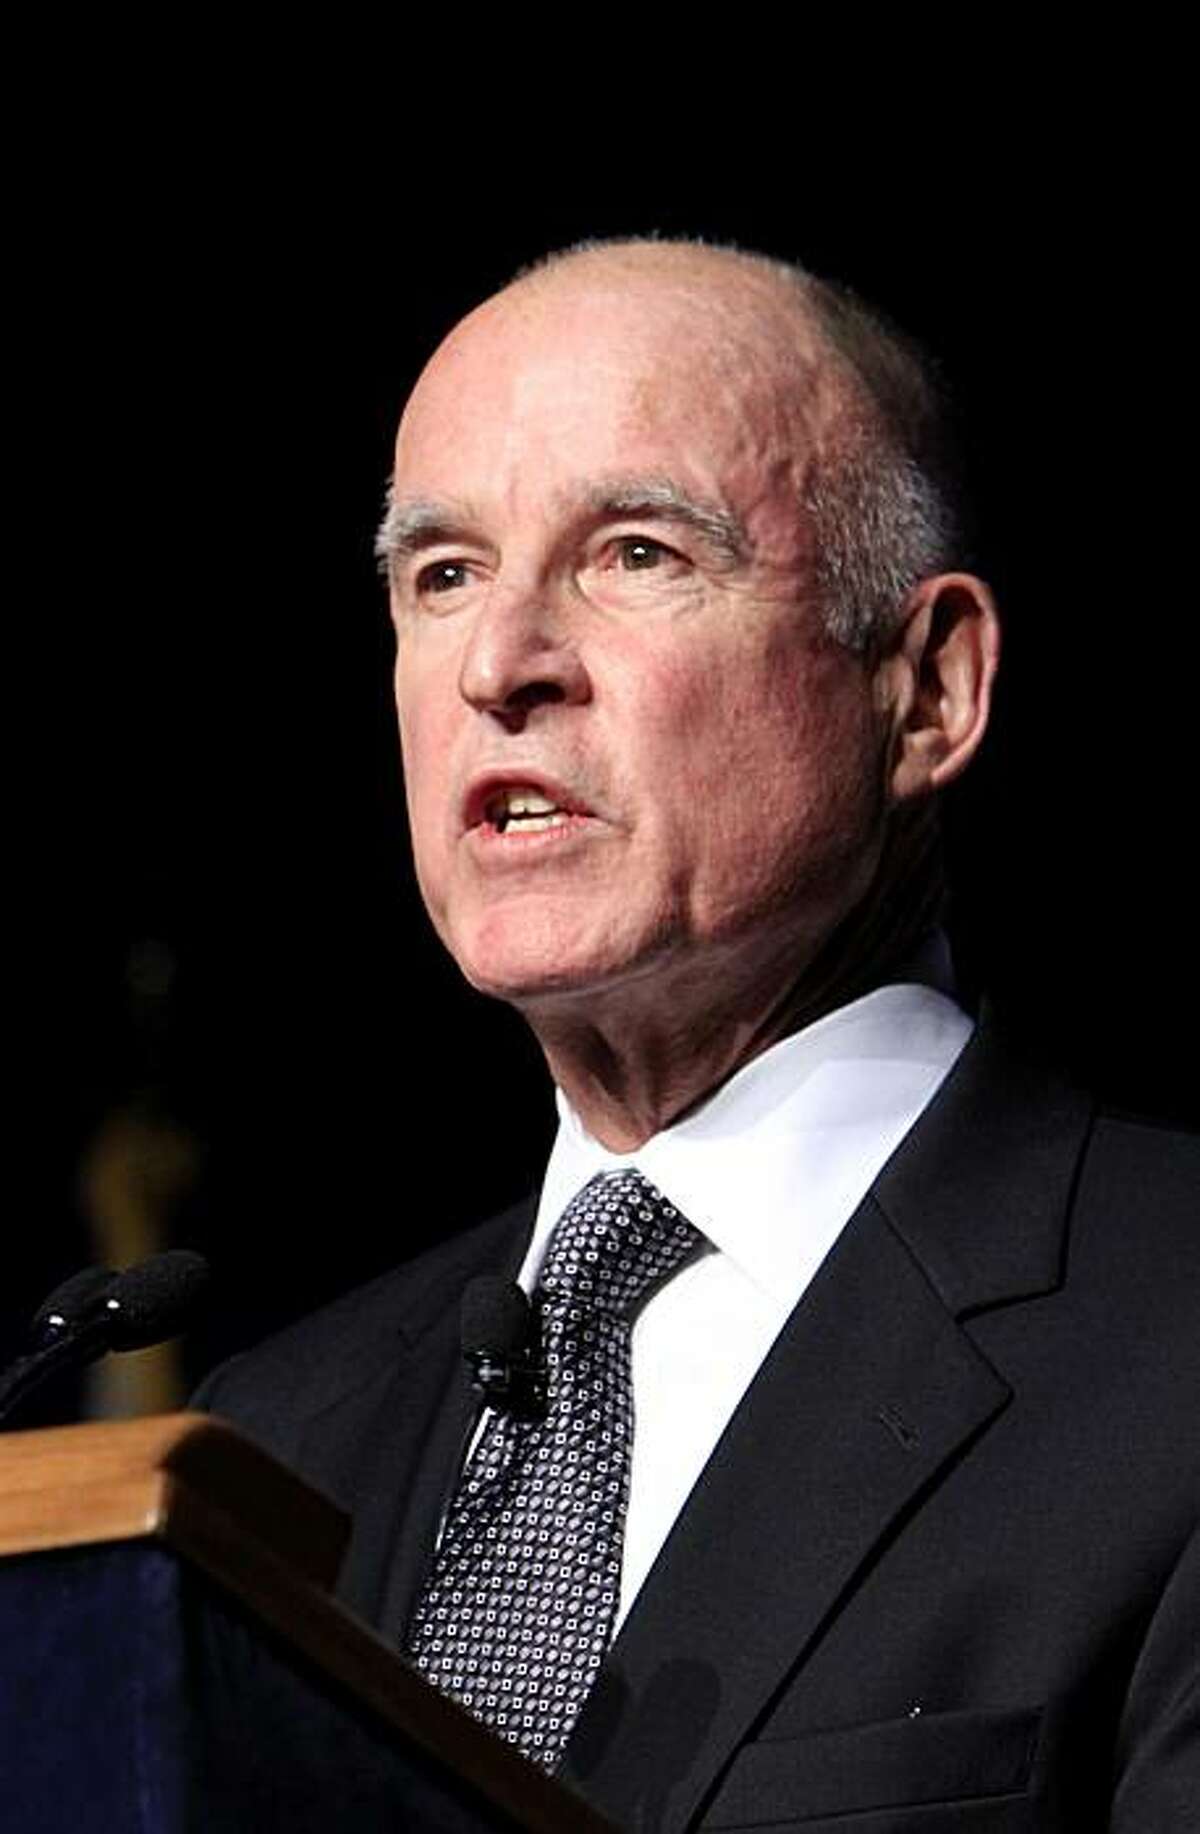 Gov. Jerry Brown addresses the audience after he was sworn-in as the 39th Governor of California during ceremonies in Sacramento, Calif. Monday, Jan. 3, 2011.